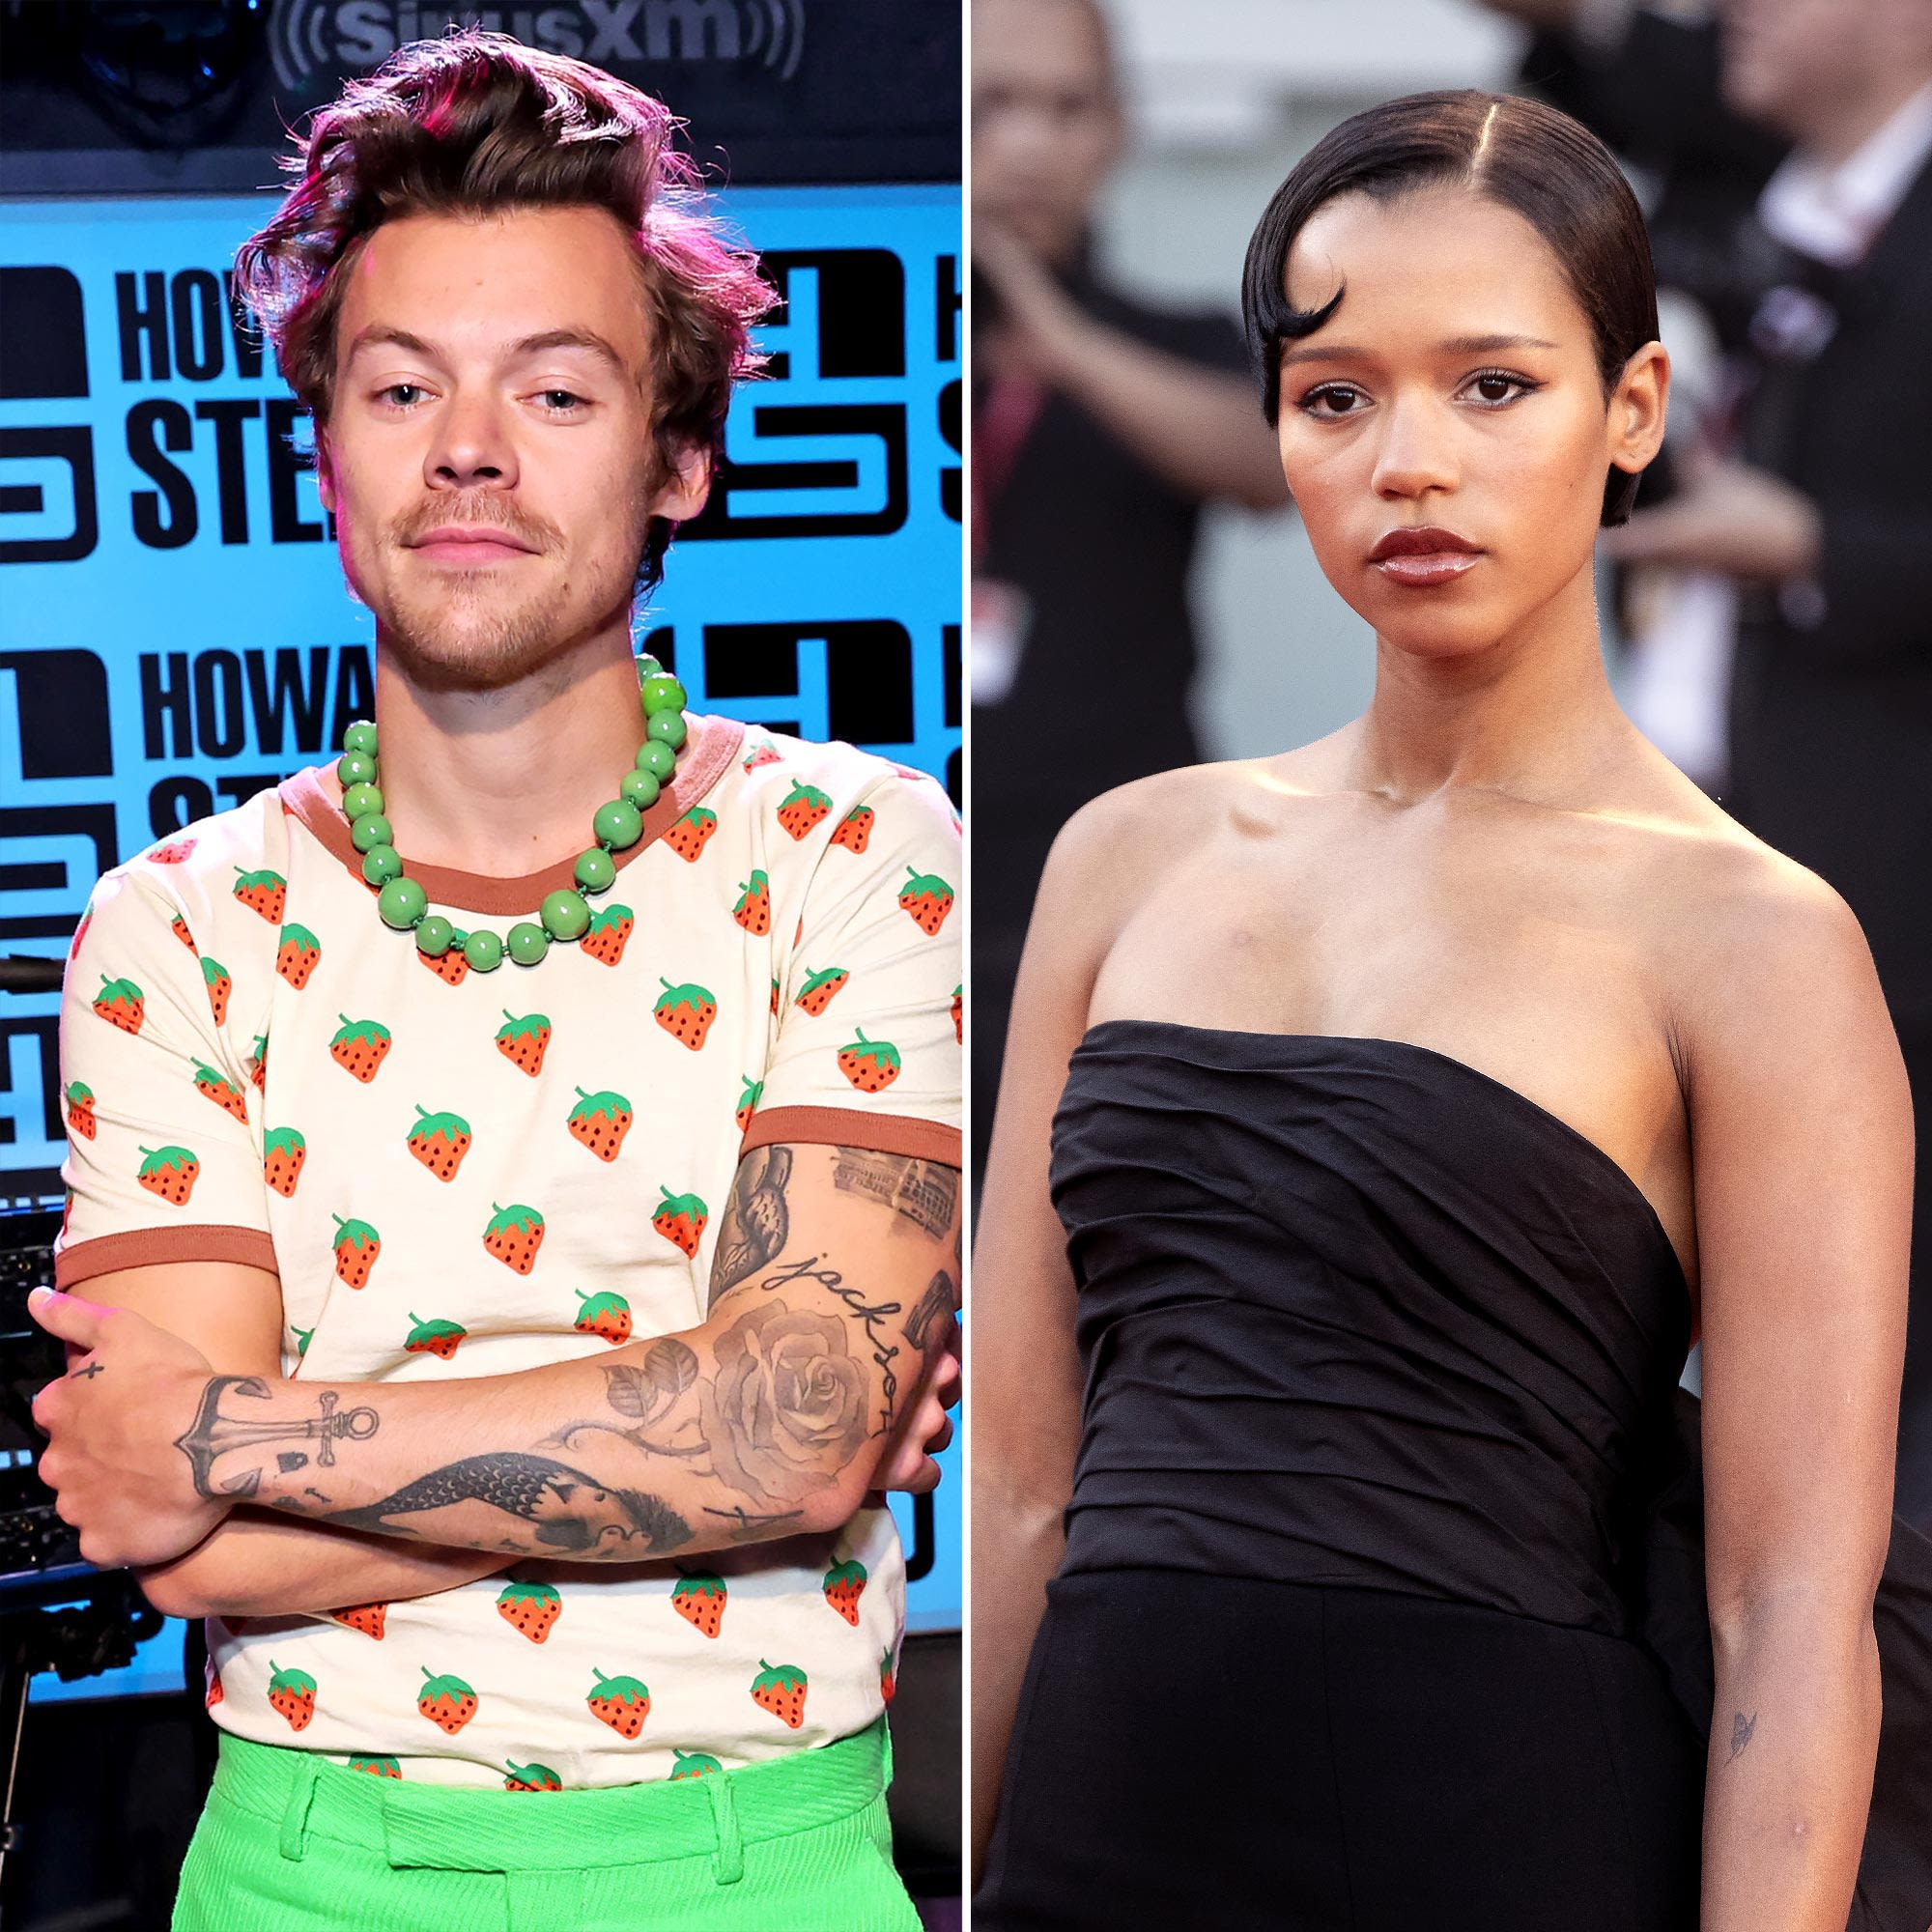 Harry Styles and Taylor Russell Split After 1 Year of Dating: Why Romance Failed